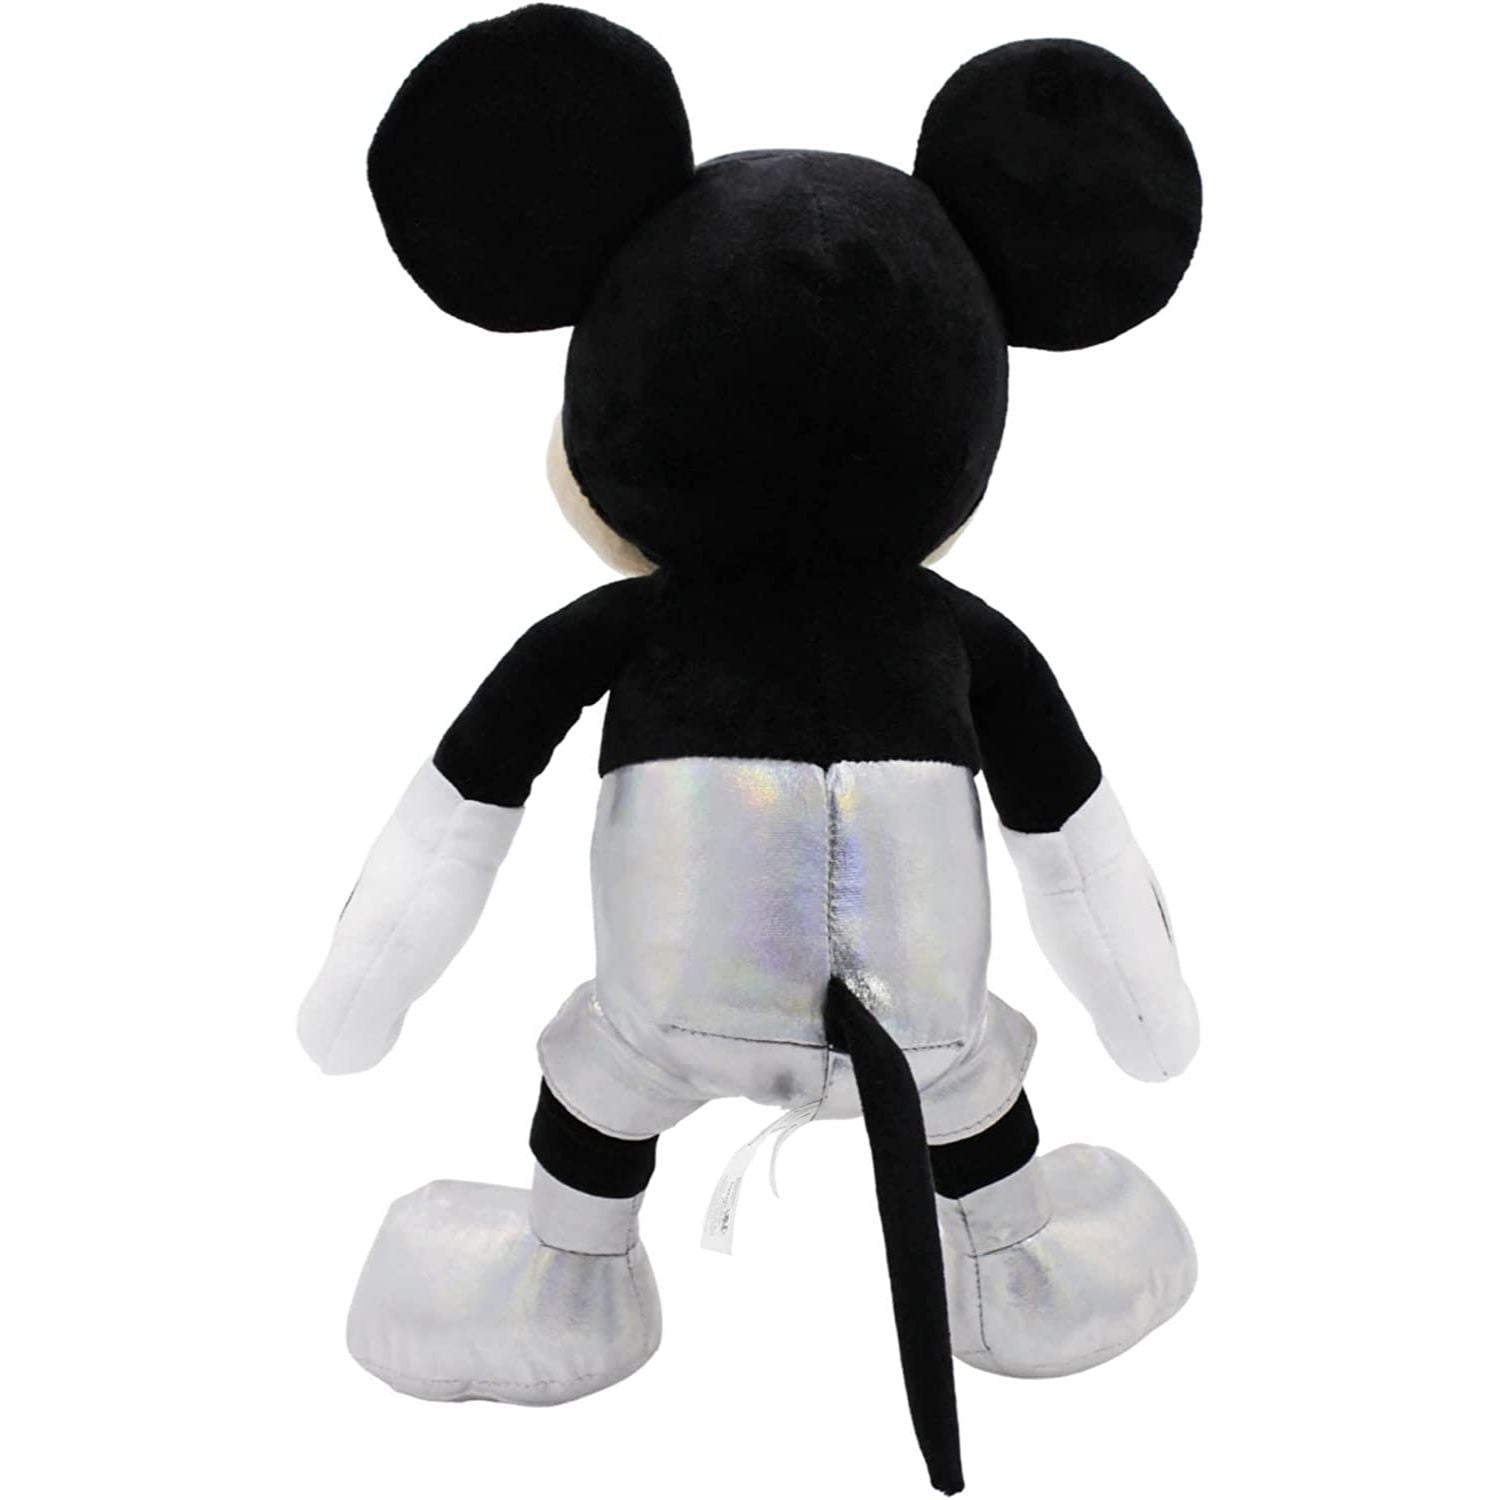 Disney - 100th Celebration - Exclusive Mickey Mouse 14In Push - Heretoserveyou